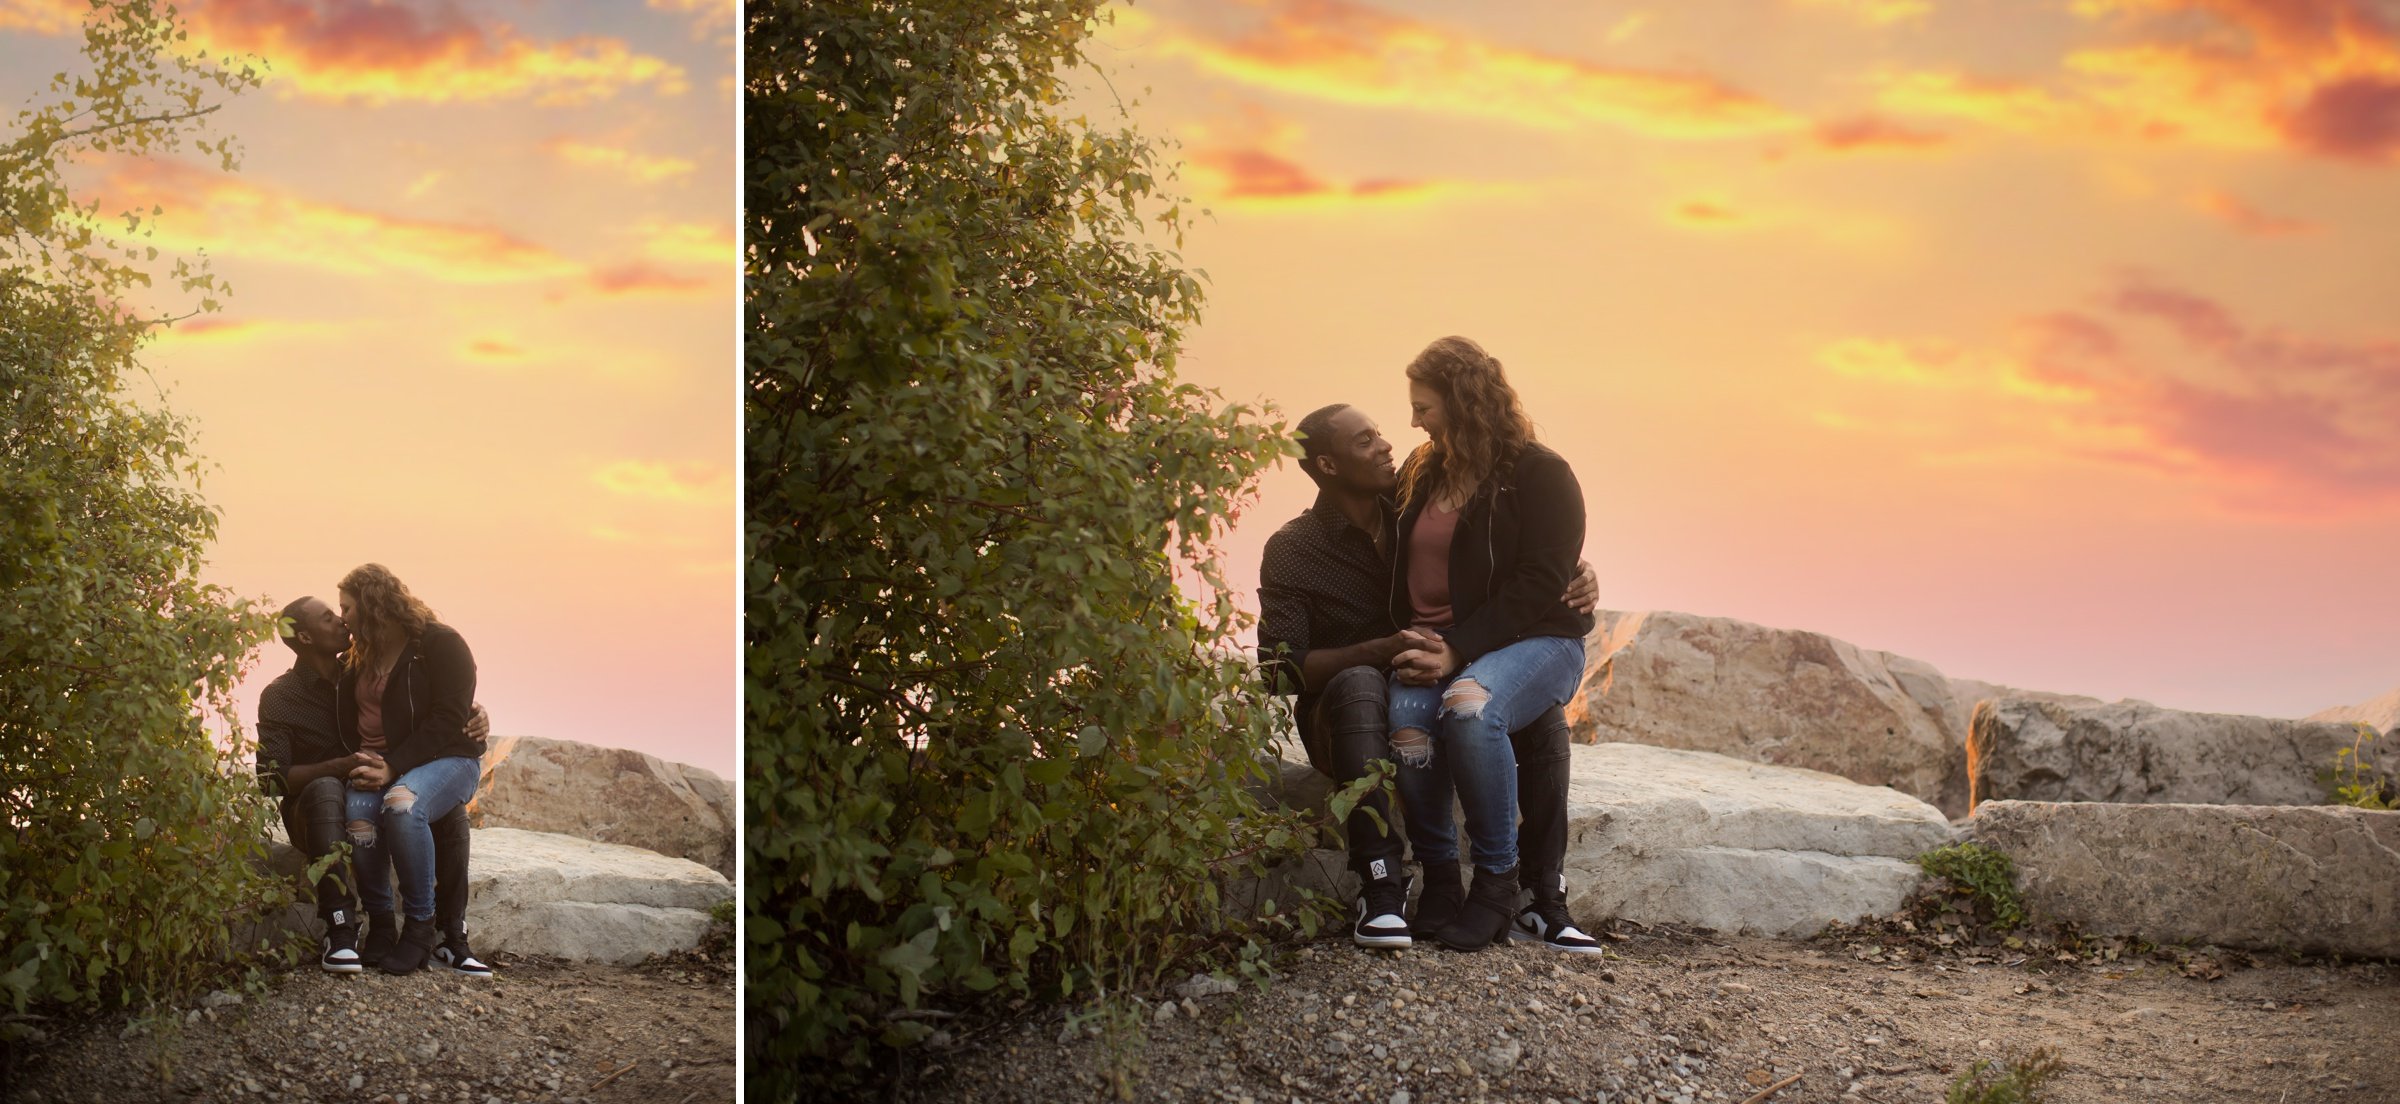 Jessica and Paul - A Sunset Bay Shore Park Engagement Session48.jpg